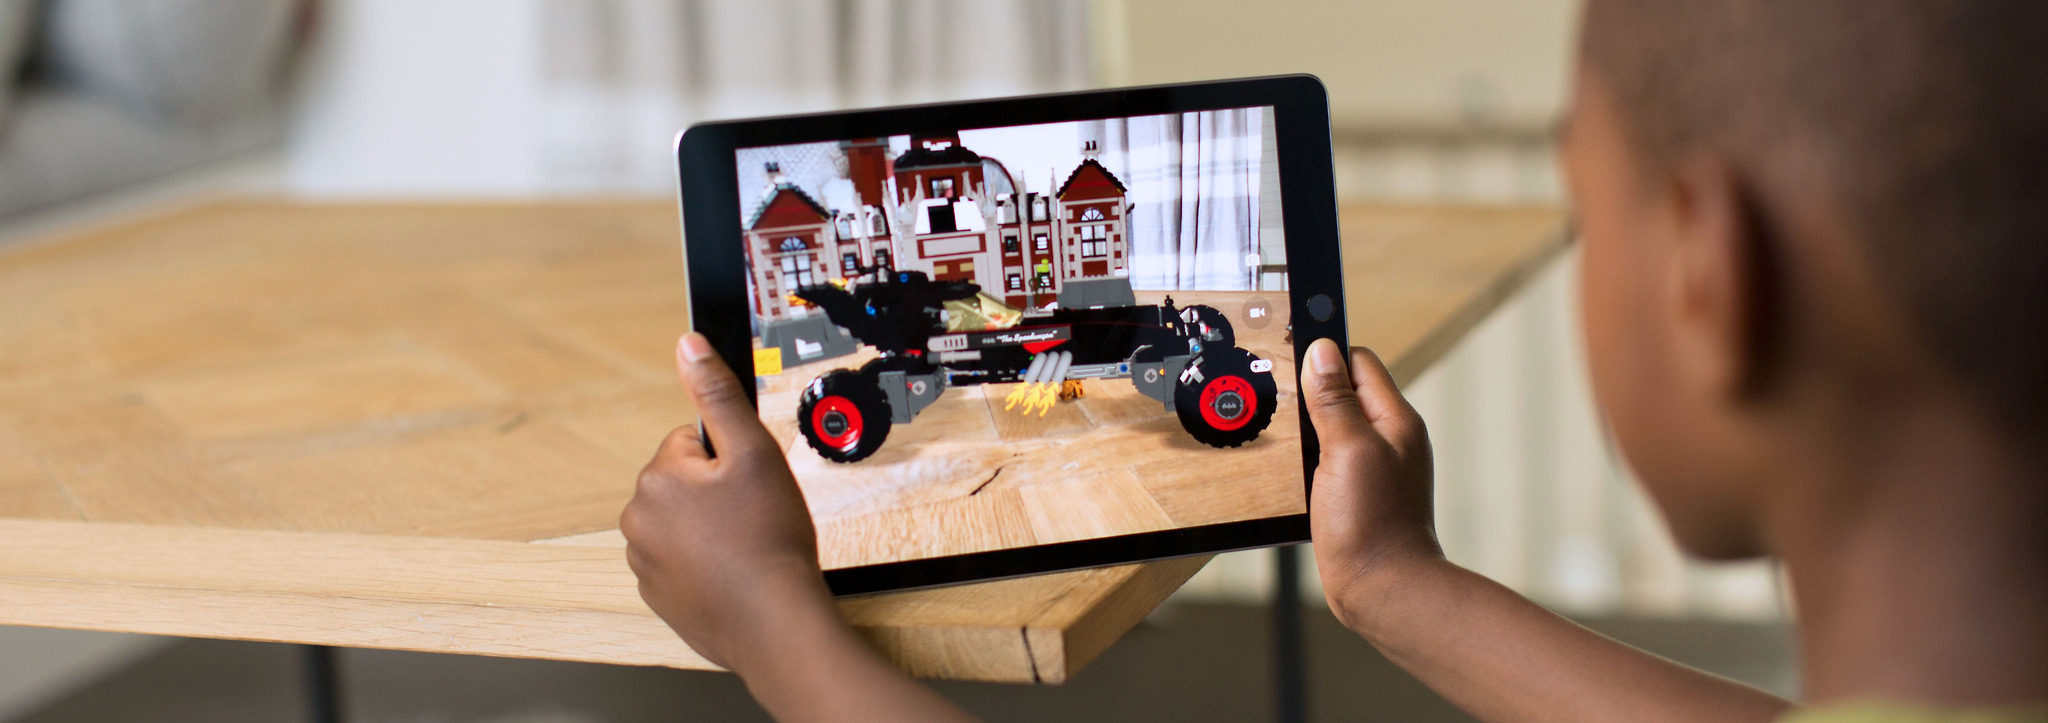 Will Apple’s ARKit help augmented reality reach mainstream audiences?